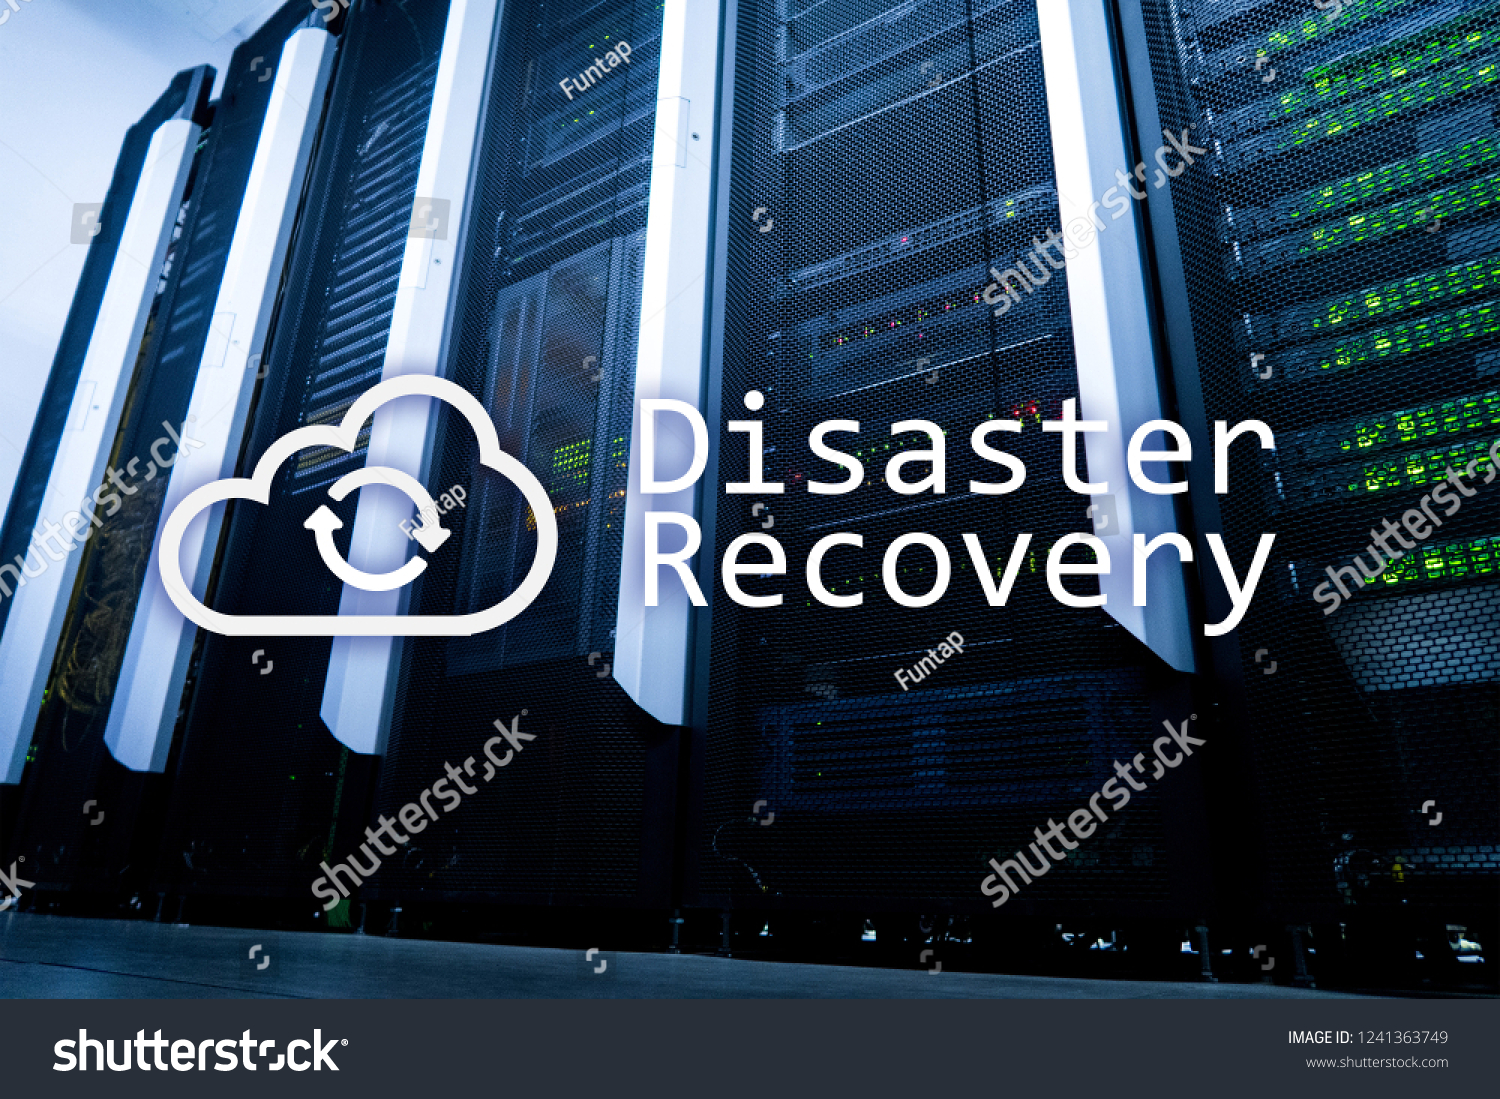 DIsaster recovery. Data loss prevention. Server room on background. #1241363749